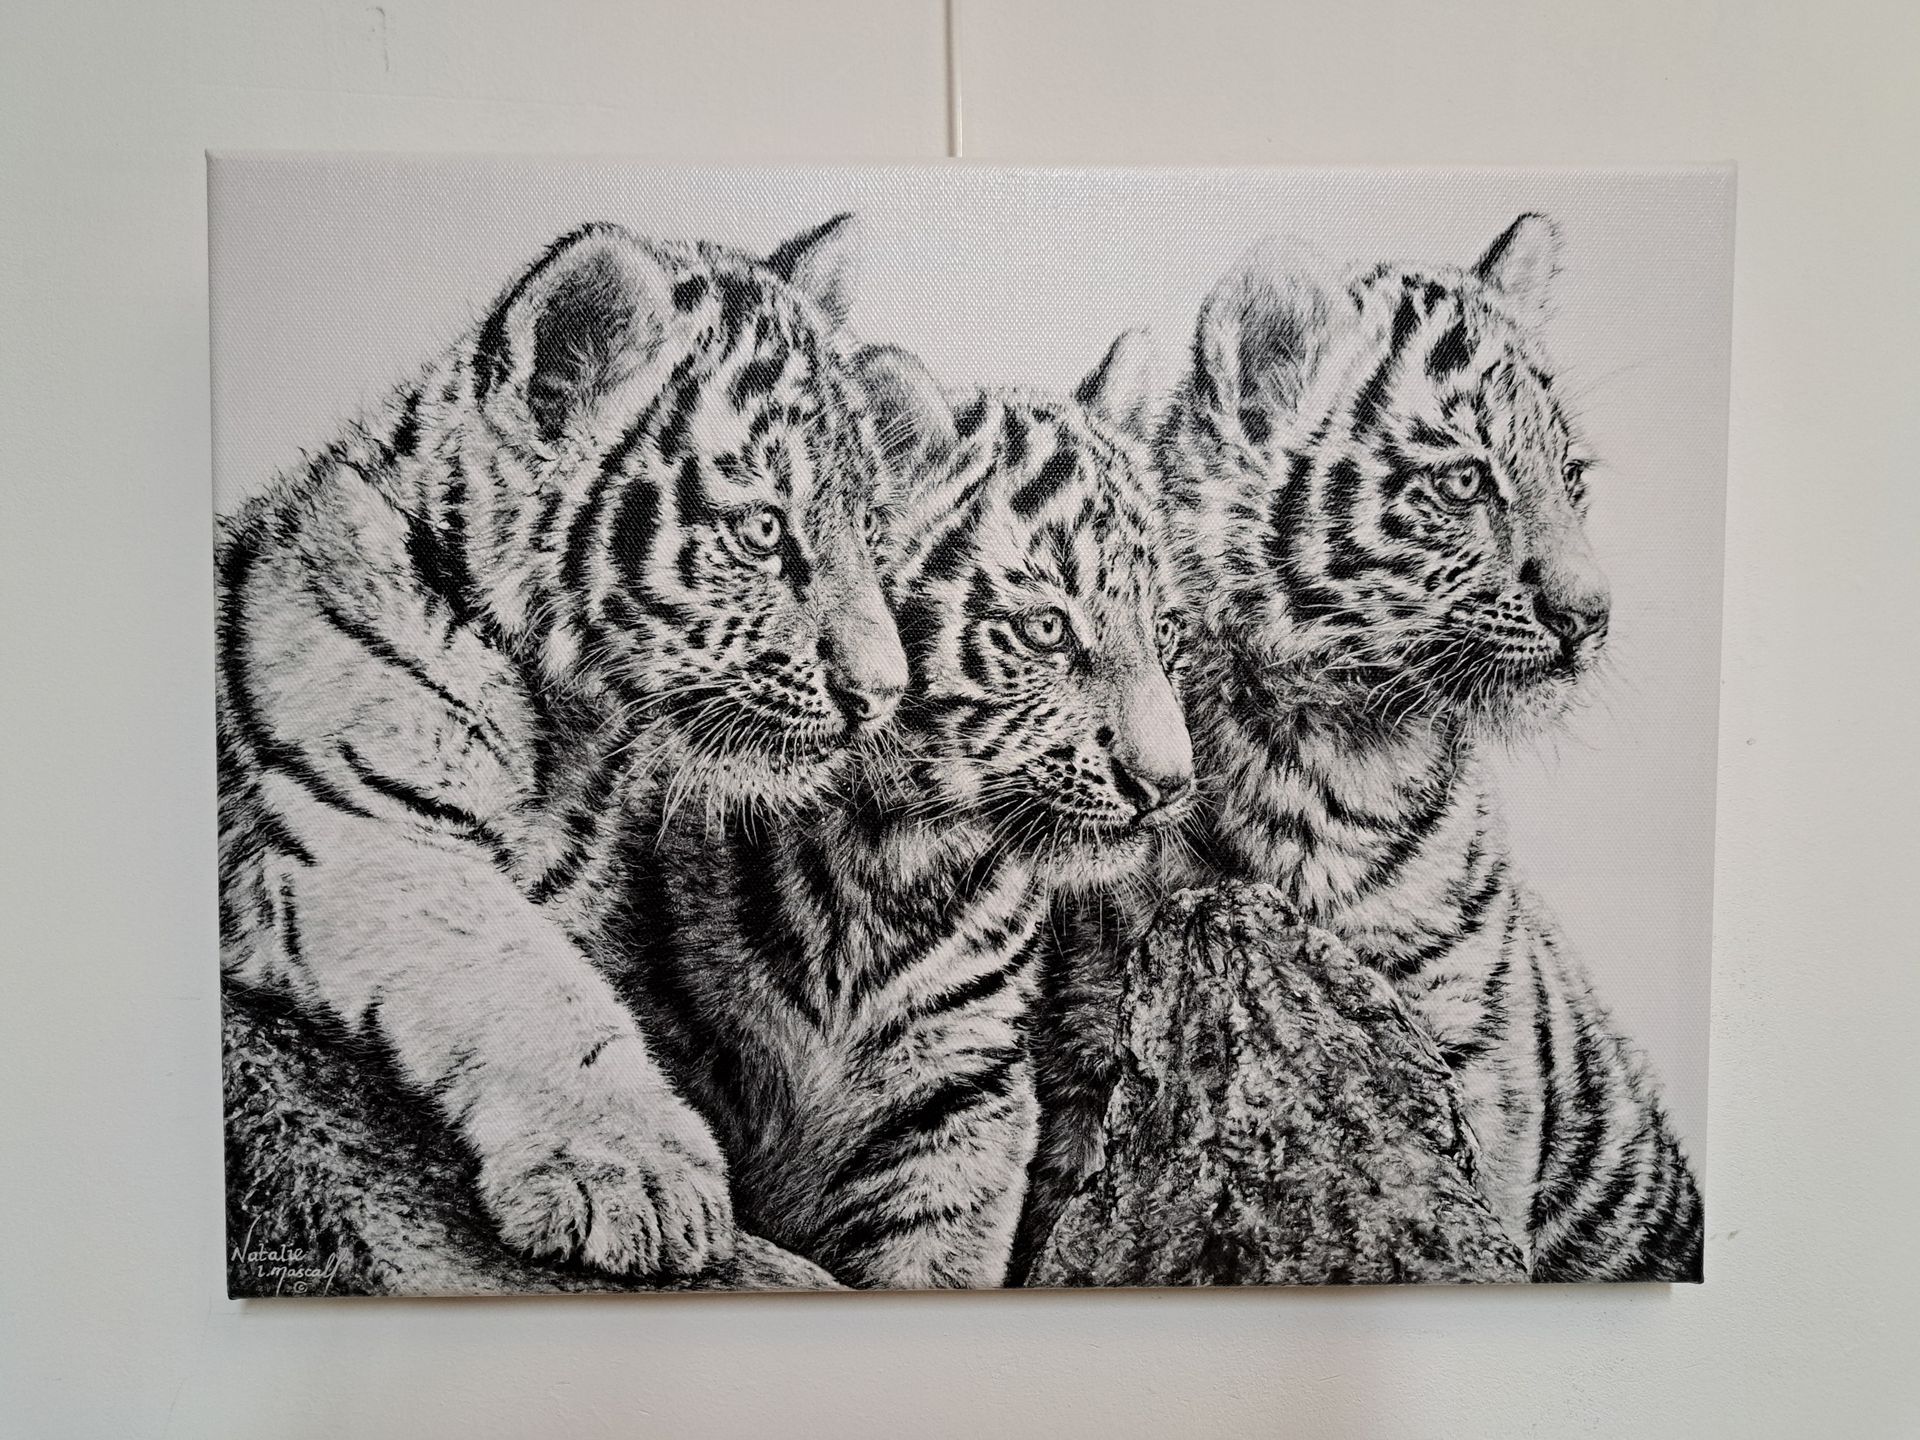 Tiger print available on paper or on canvas, Tiger print, open edition tiger print, Tiger Canvas print, Tiger cub print, three tiger cubs print, three tiger cubs canvas print, custom canvas prints, 12x16inches tiger drawing printed to canvas, Art to canvas, art prints, Natalie Mascall's prints, Natalie's Mascall's high quality canvas prints,
